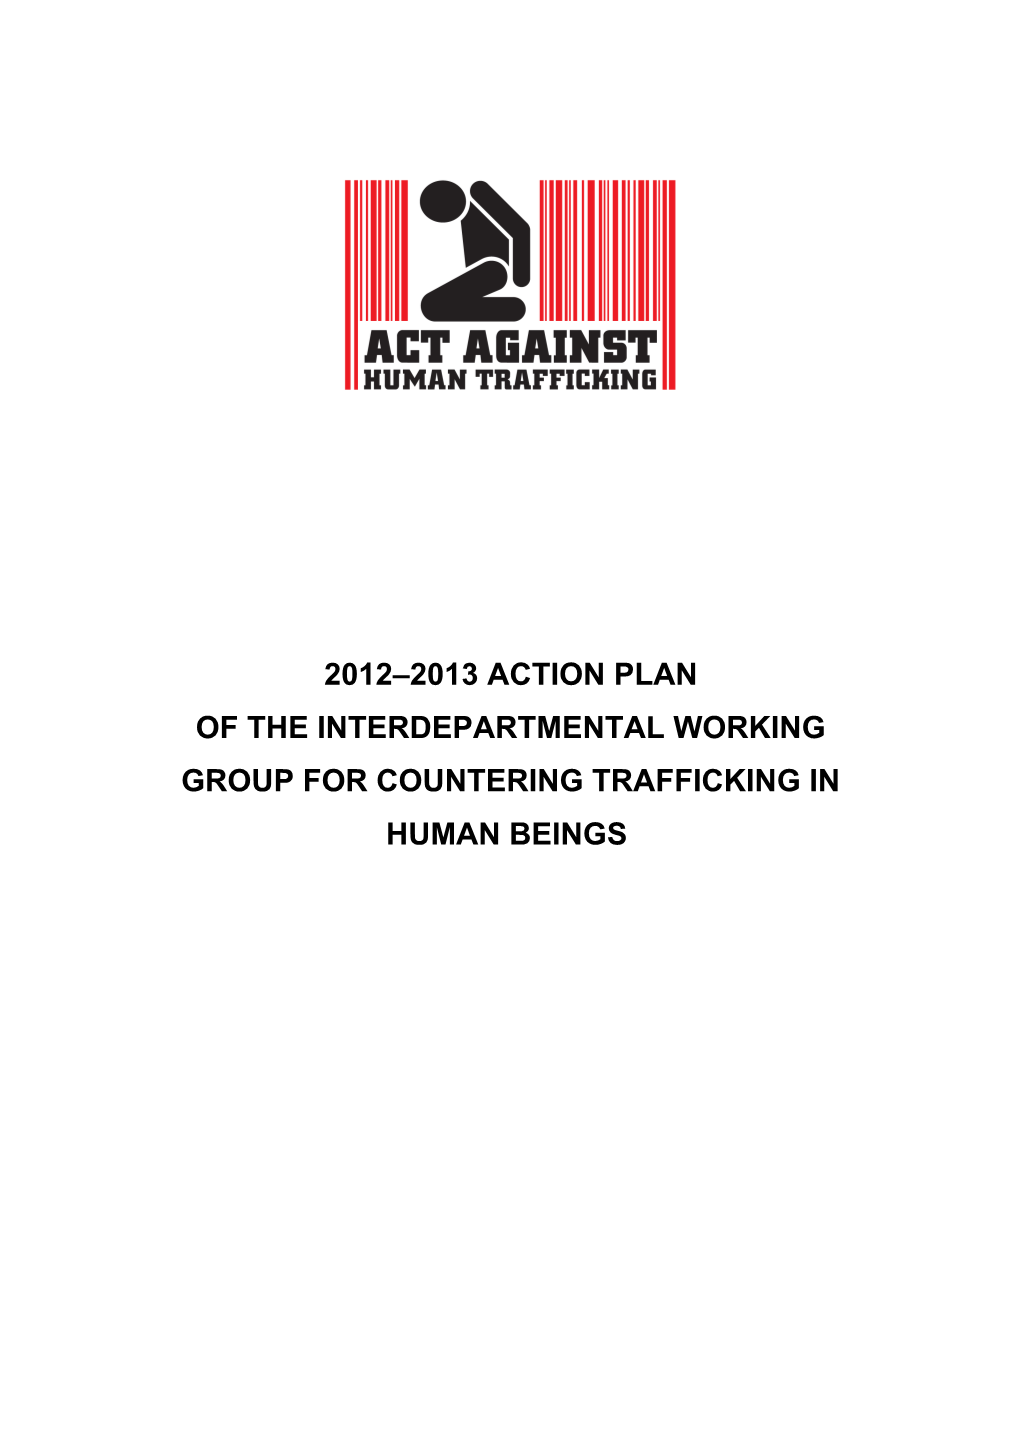 Of the Interdepartmental Working Groupfor Countering Trafficking in Human Beings